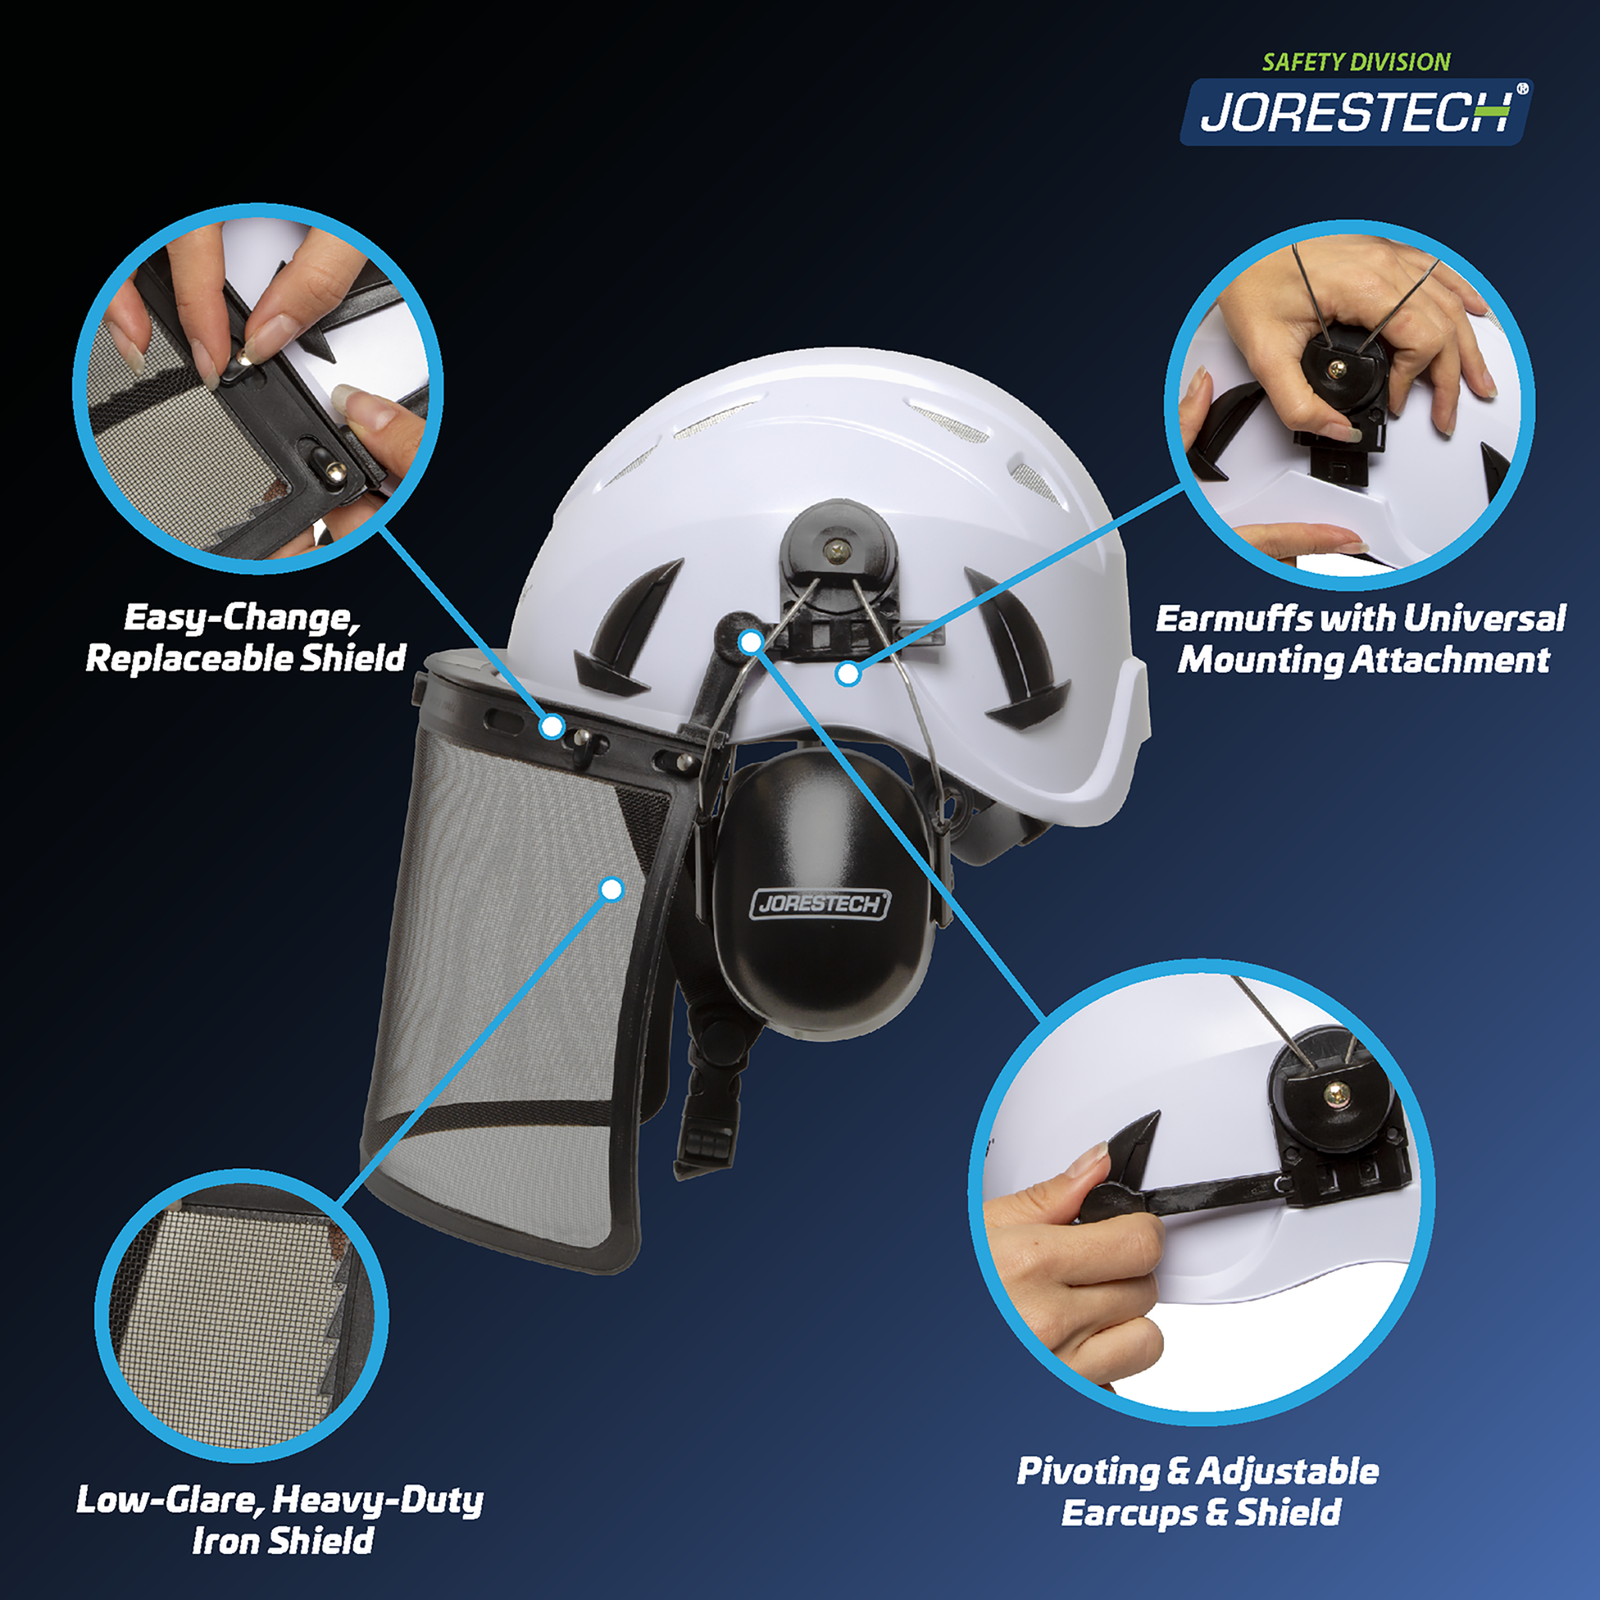 Features of the Jorestech white safety helmet system with iron mesh face shield and earmuffs. Four call outs read: easy to change replaceable shield, Earmuffs with universal mounting attachment, low-glare heavy-duty iron shield, pivoting & adjustable earcups & shield